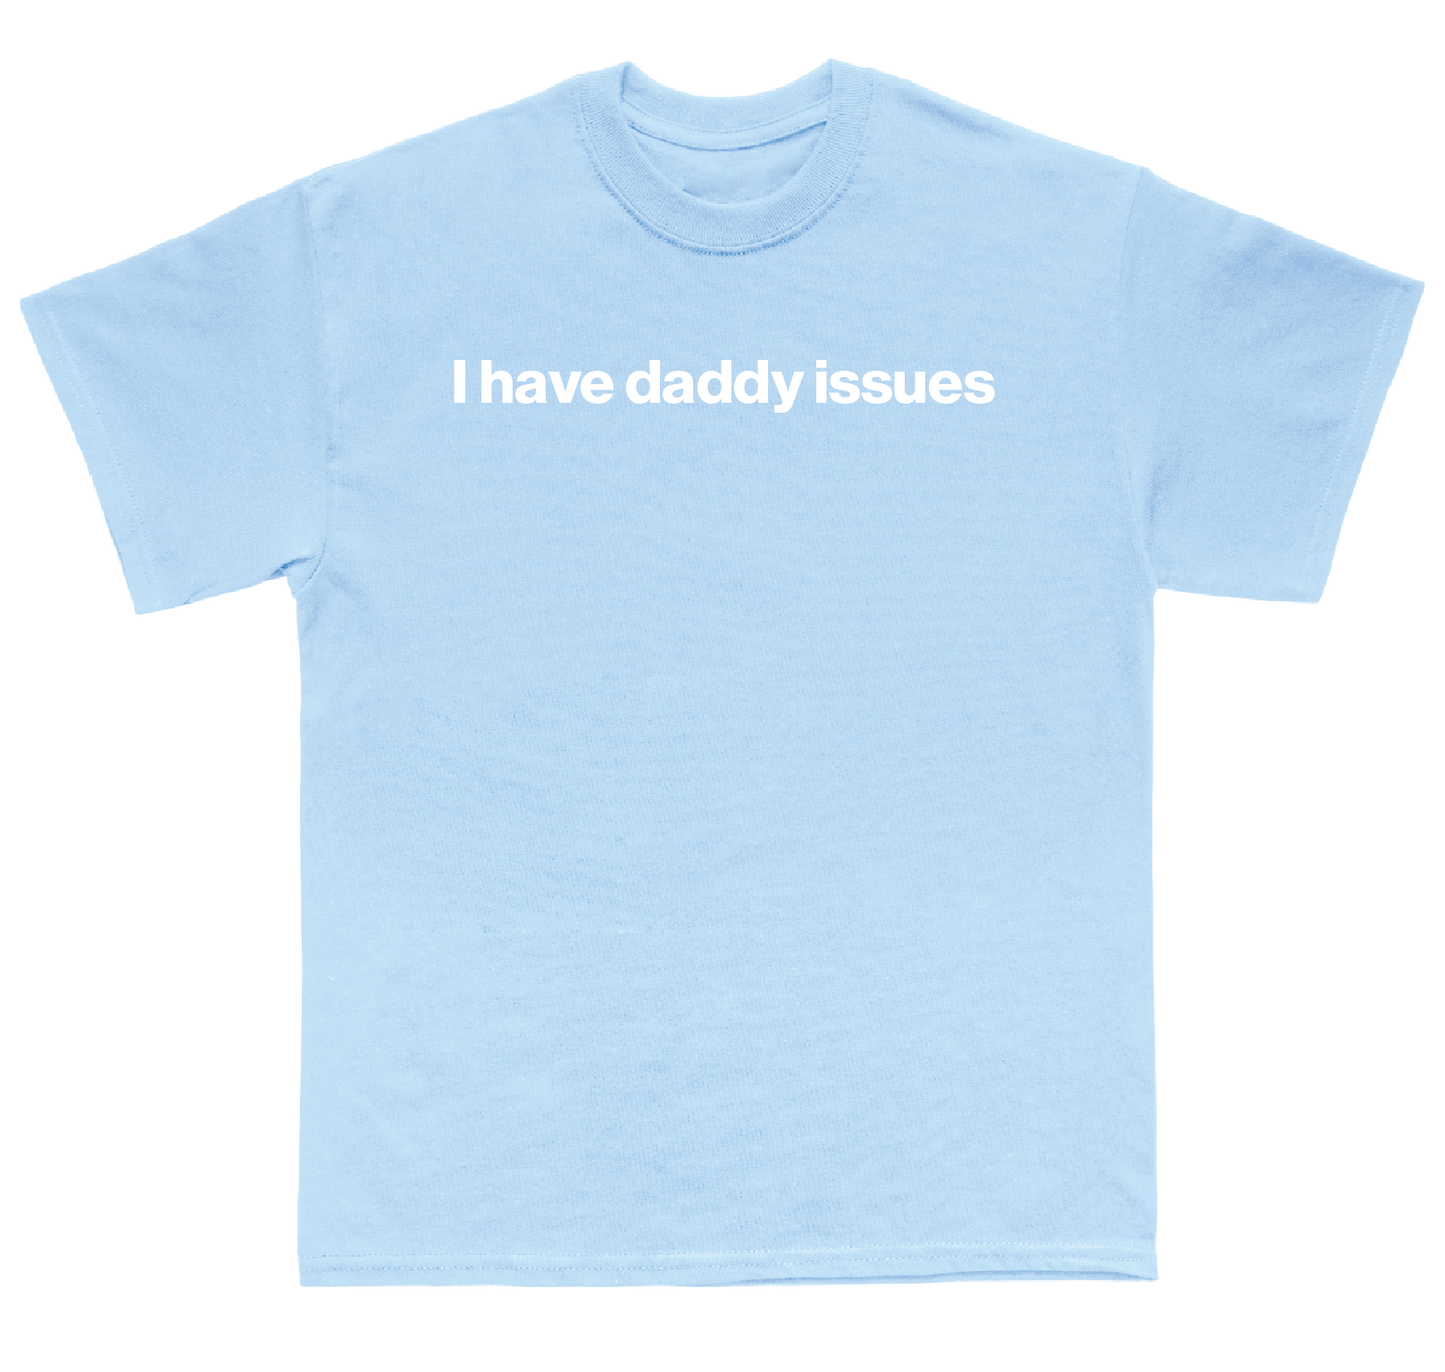 I have daddy issues shirt